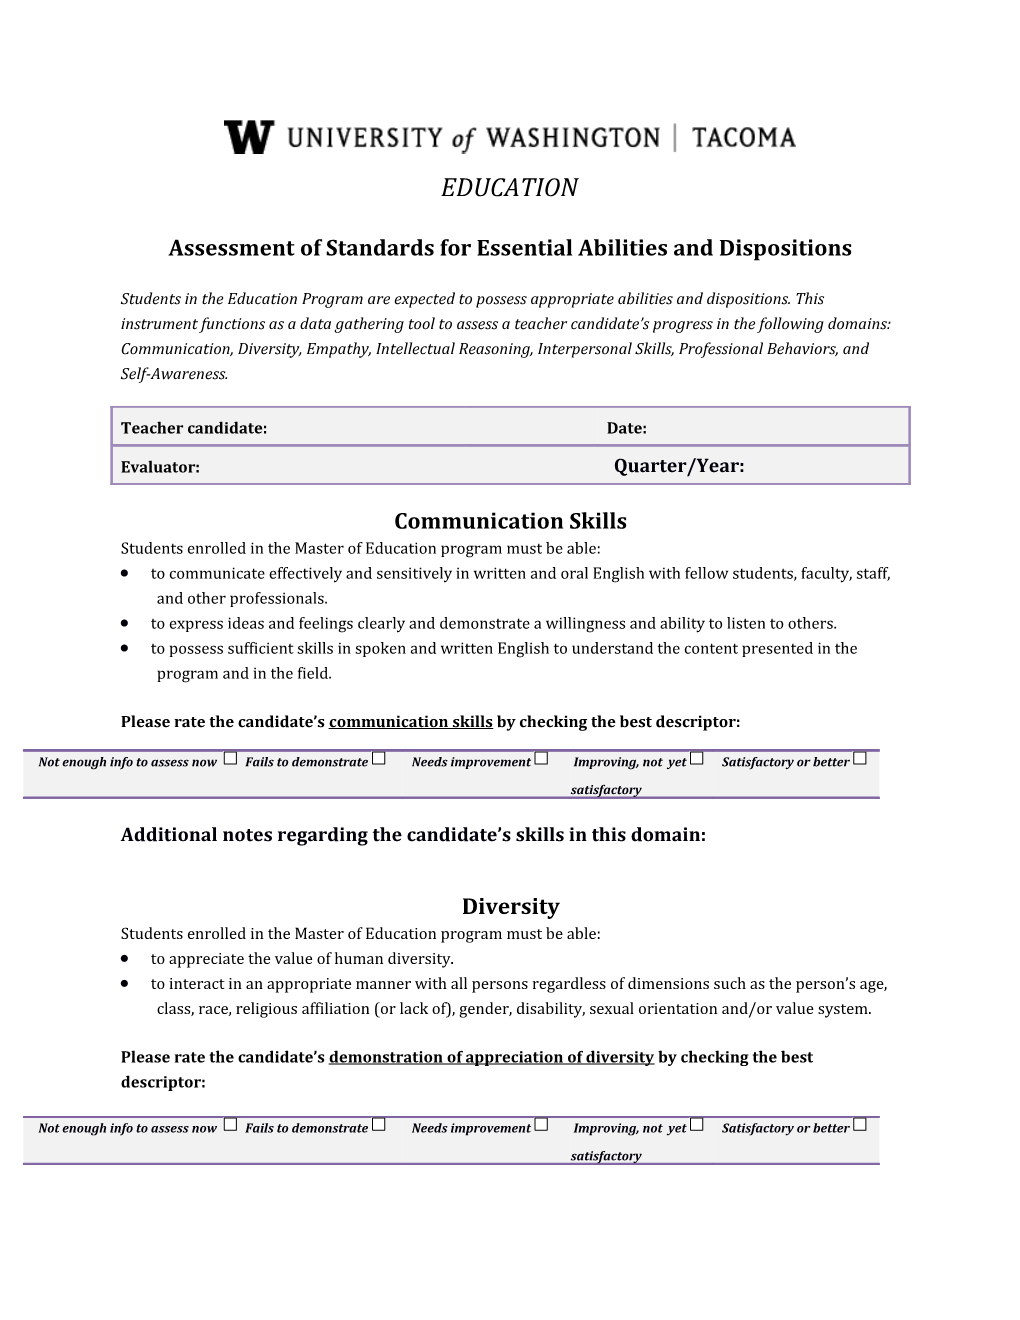 Assessment of Standards for Essential Abilities and Dispositions